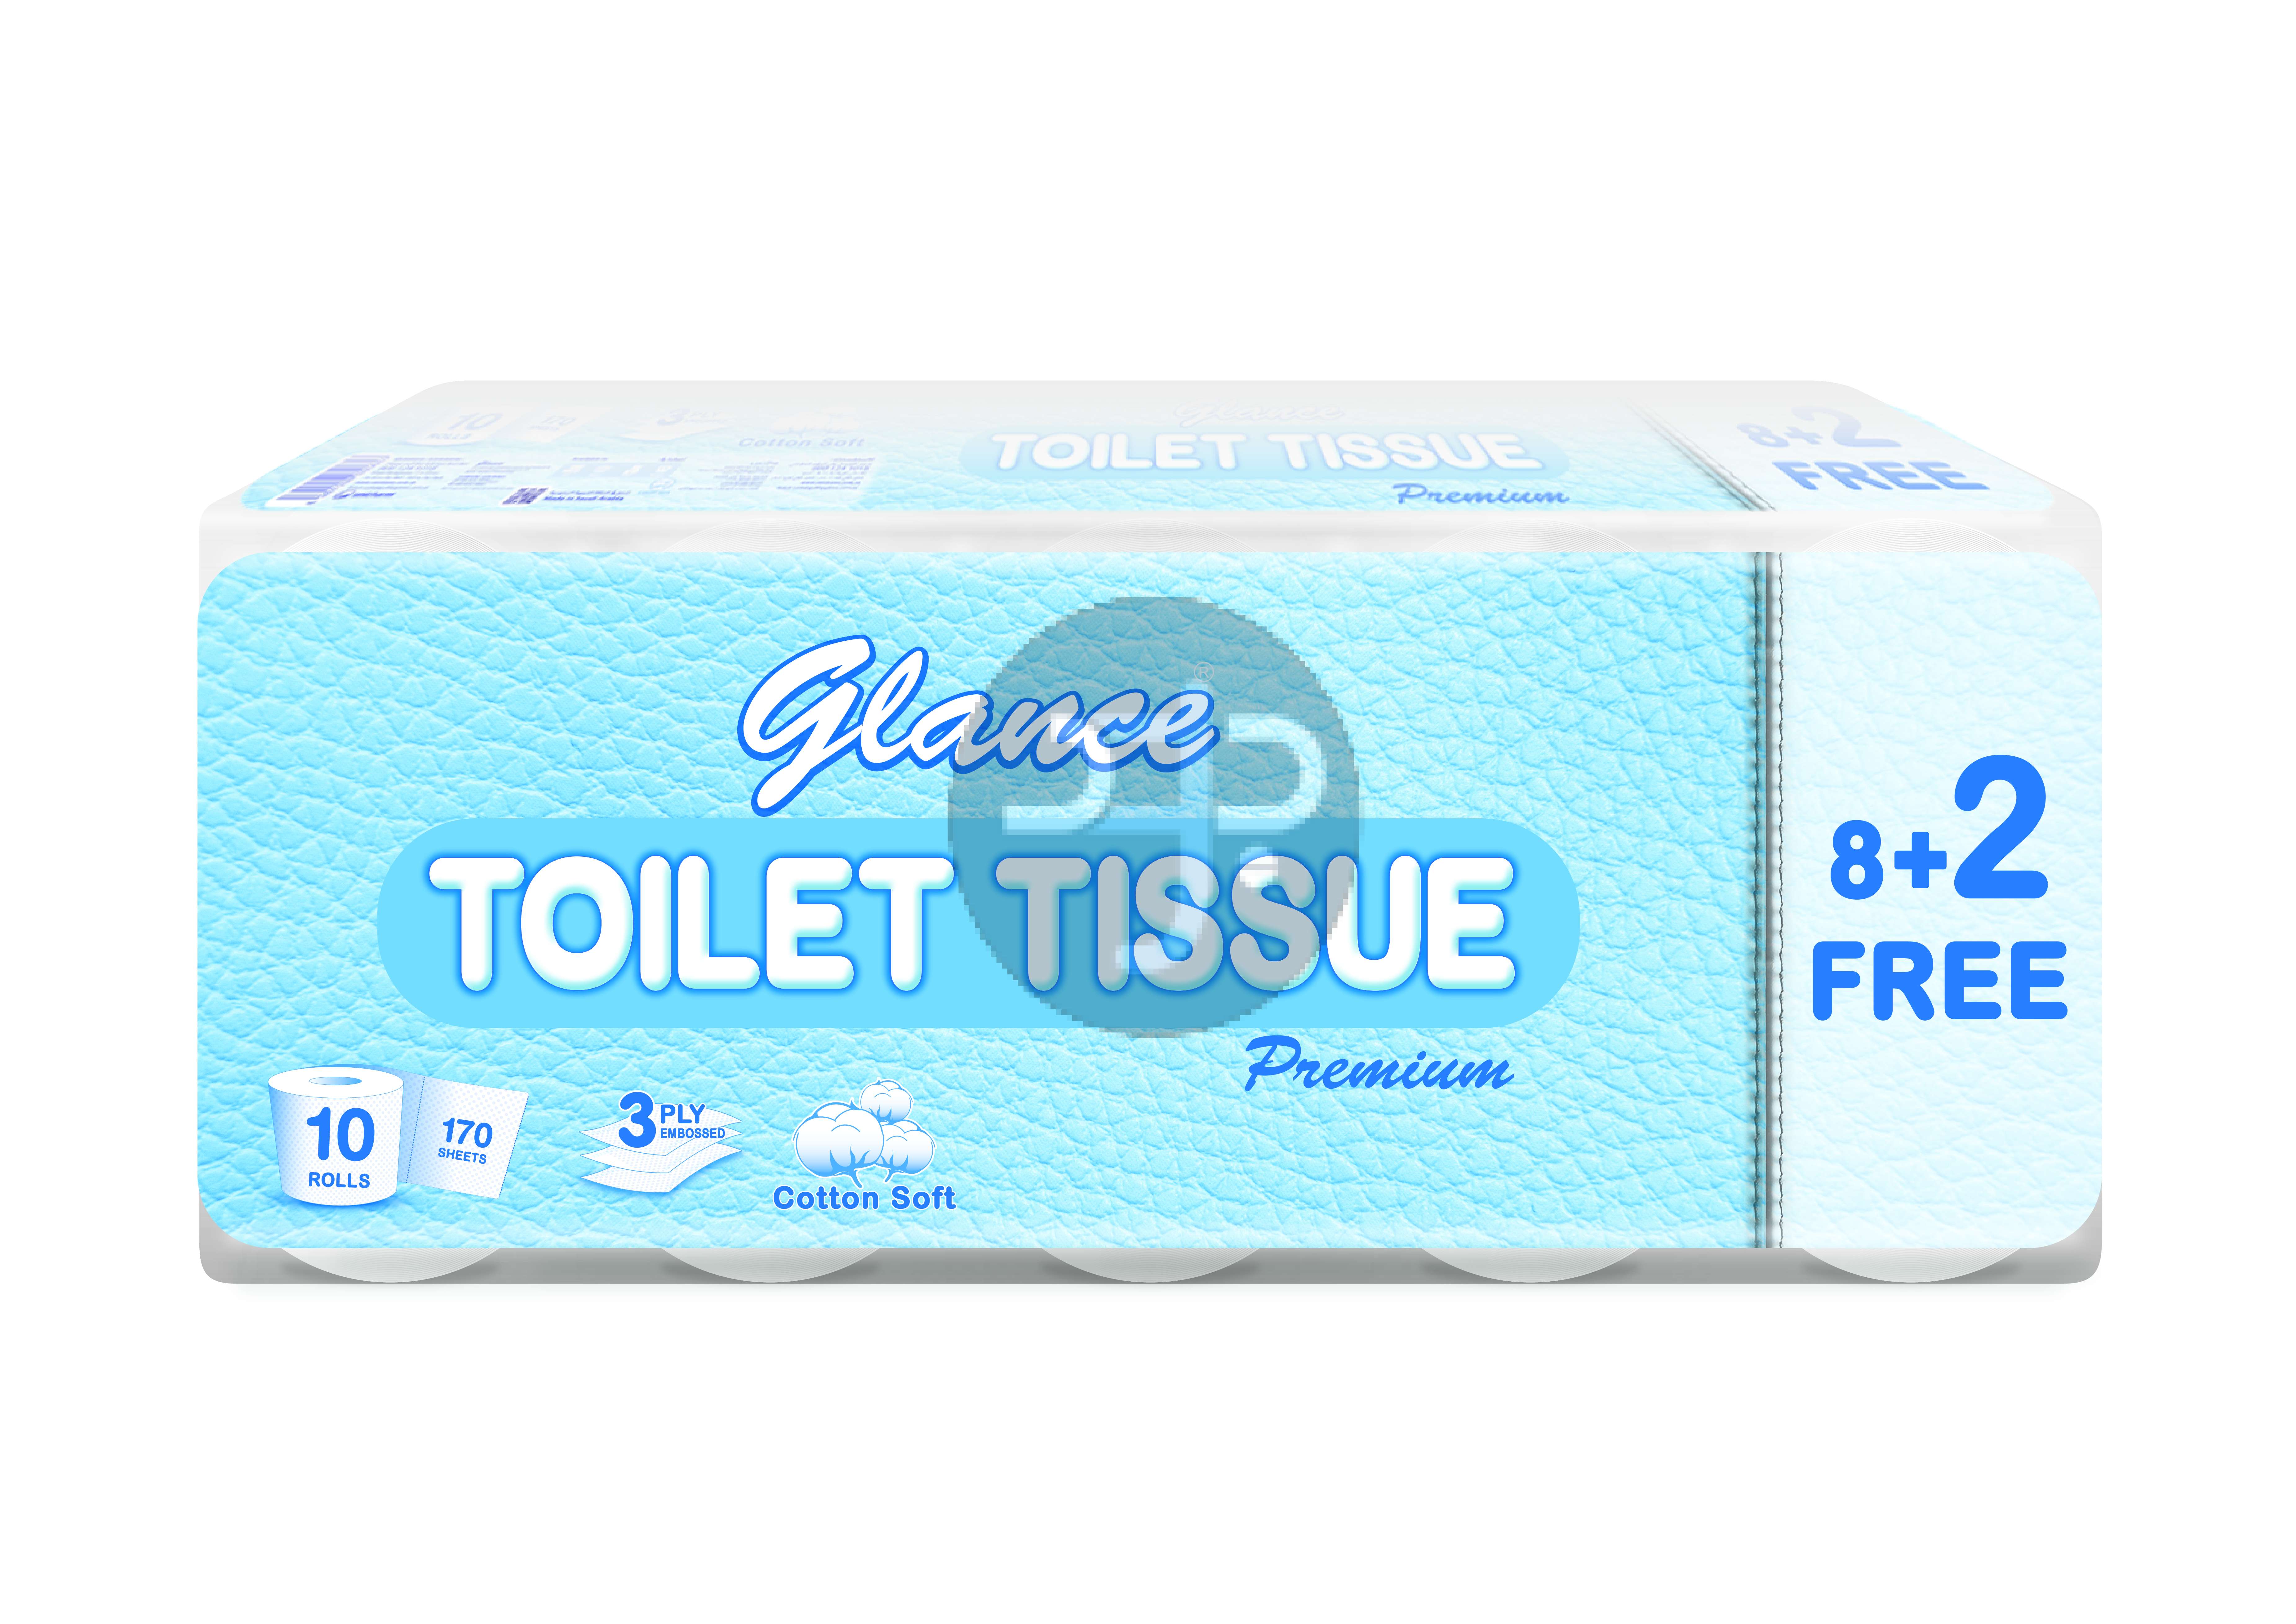 Product-Glance Toilet Tissue 280 Sheets 6 Packs 8+2 Roll